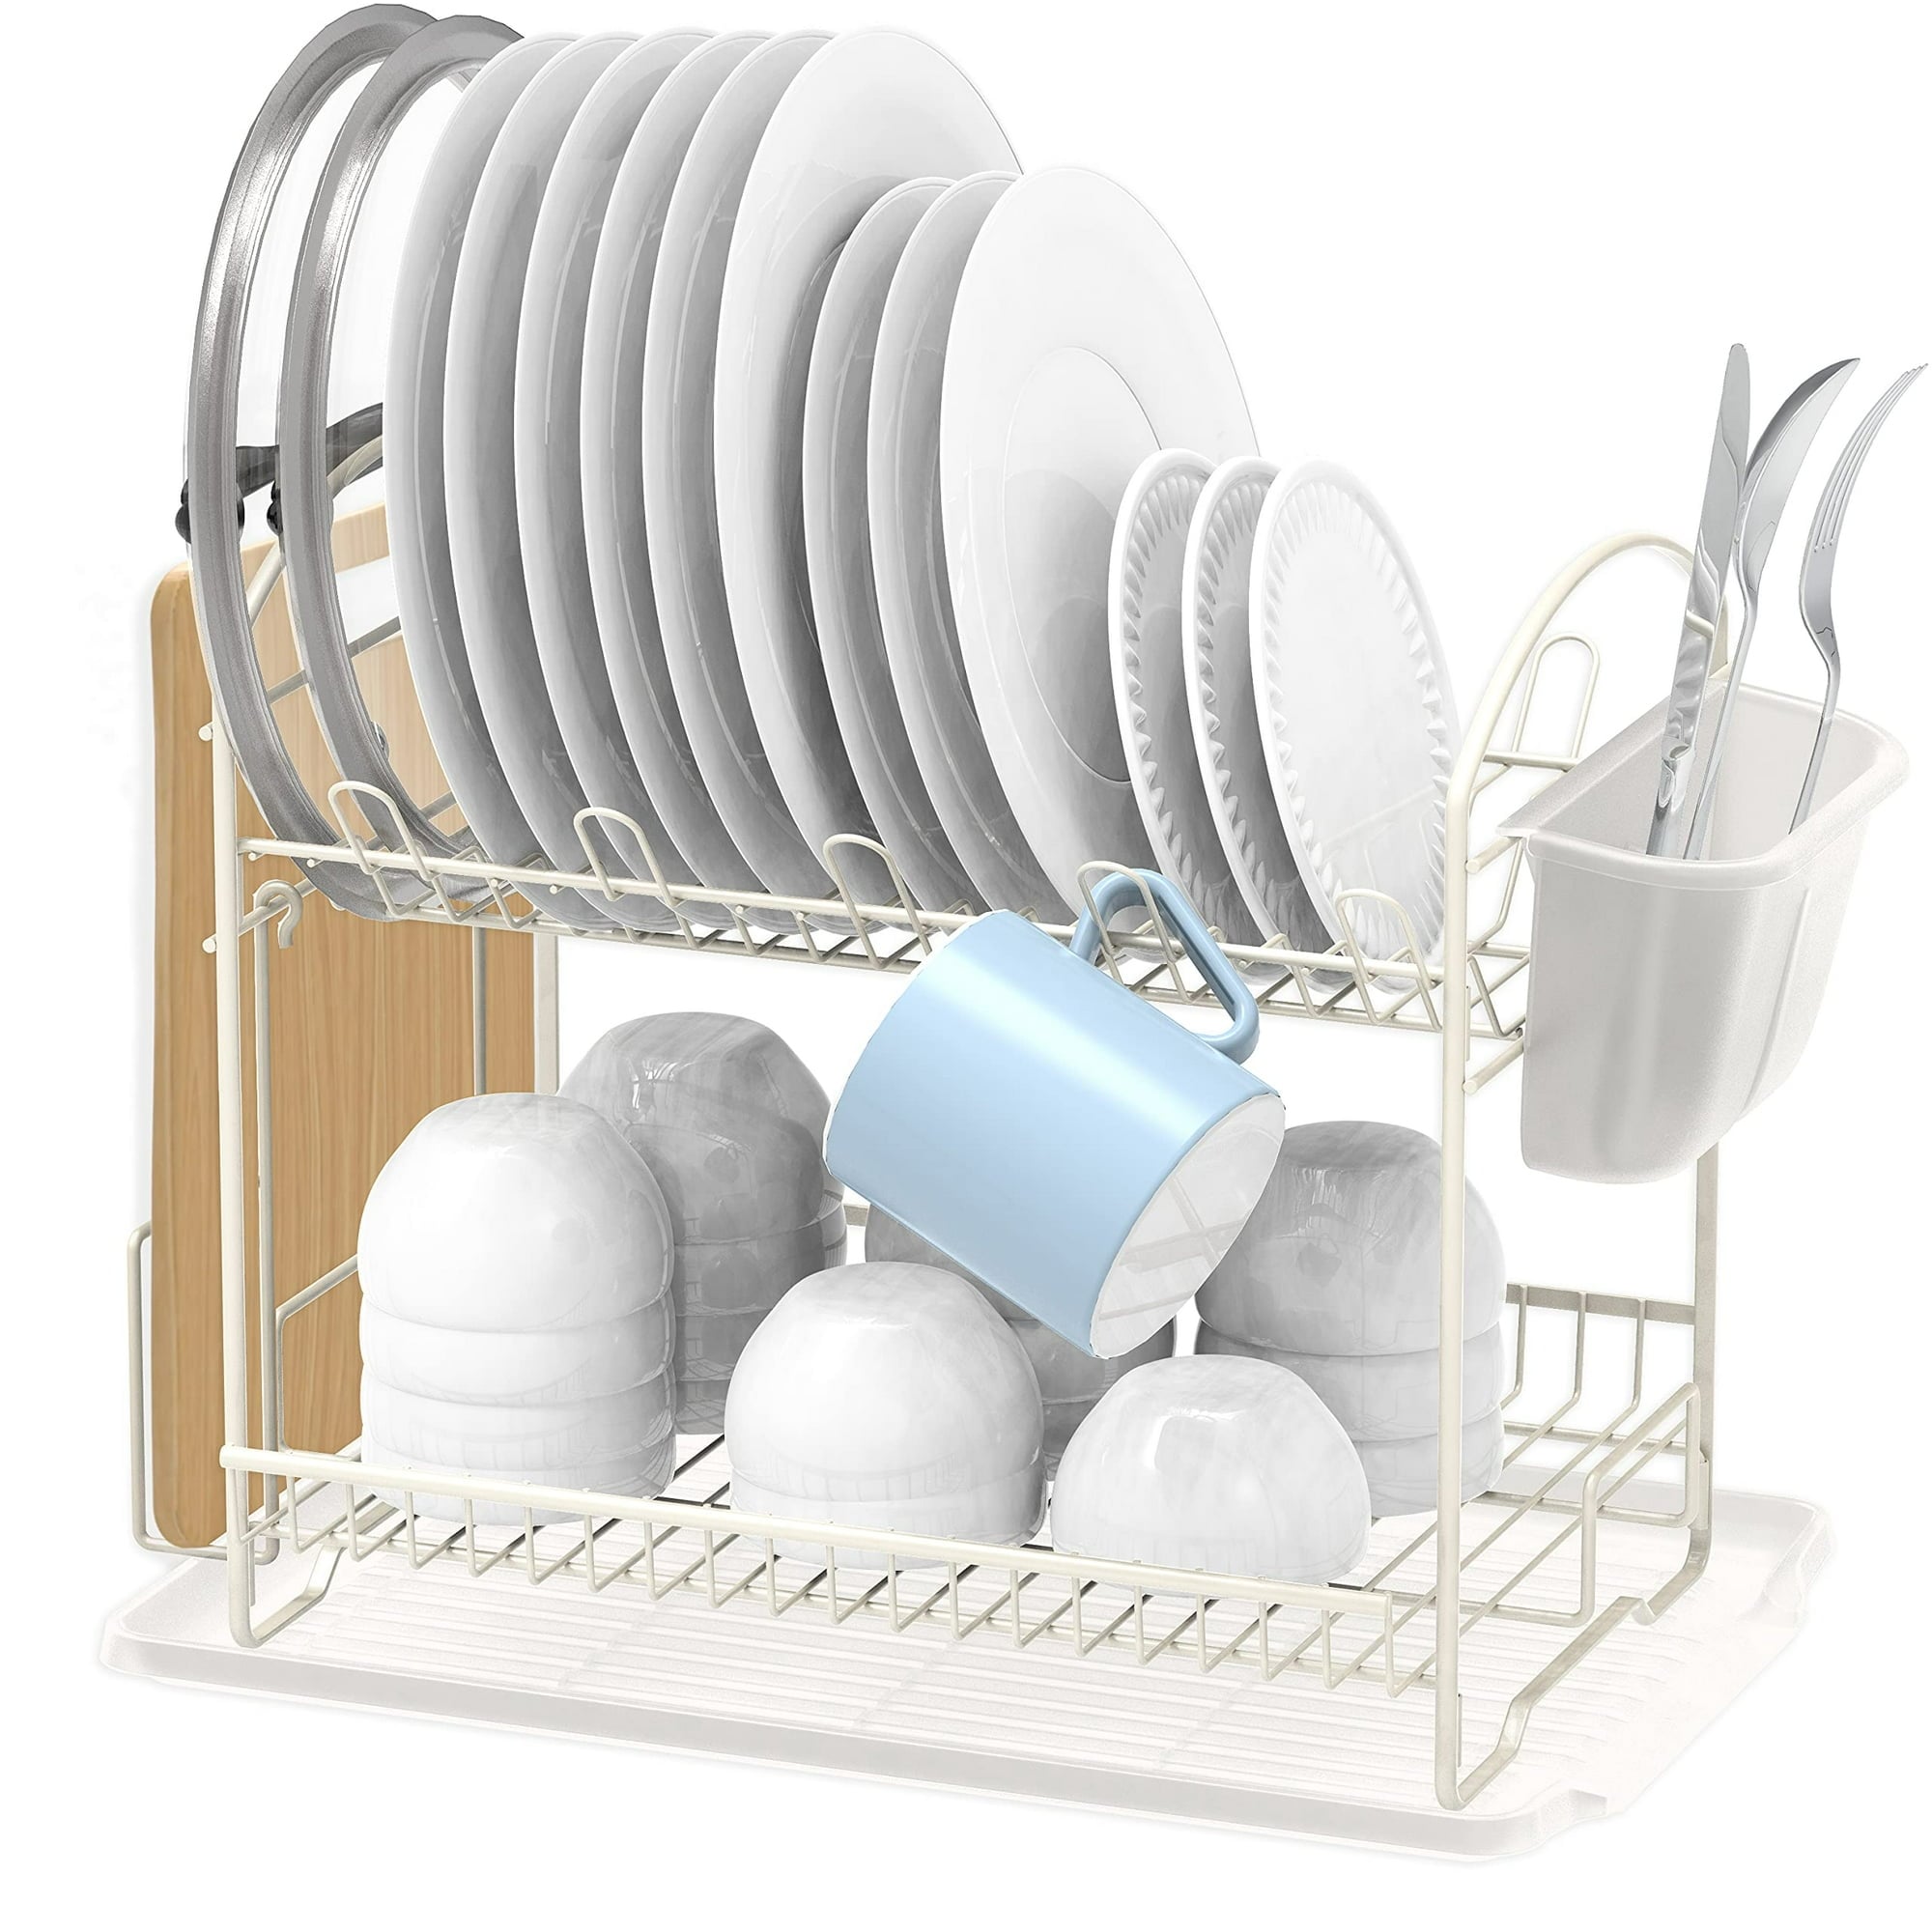 https://ak1.ostkcdn.com/images/products/is/images/direct/4061ce9cda858fbb88a1686930fb29eb084e970a/2-Tier-Dish-Rack-with-Drainboard%2C-White.jpg